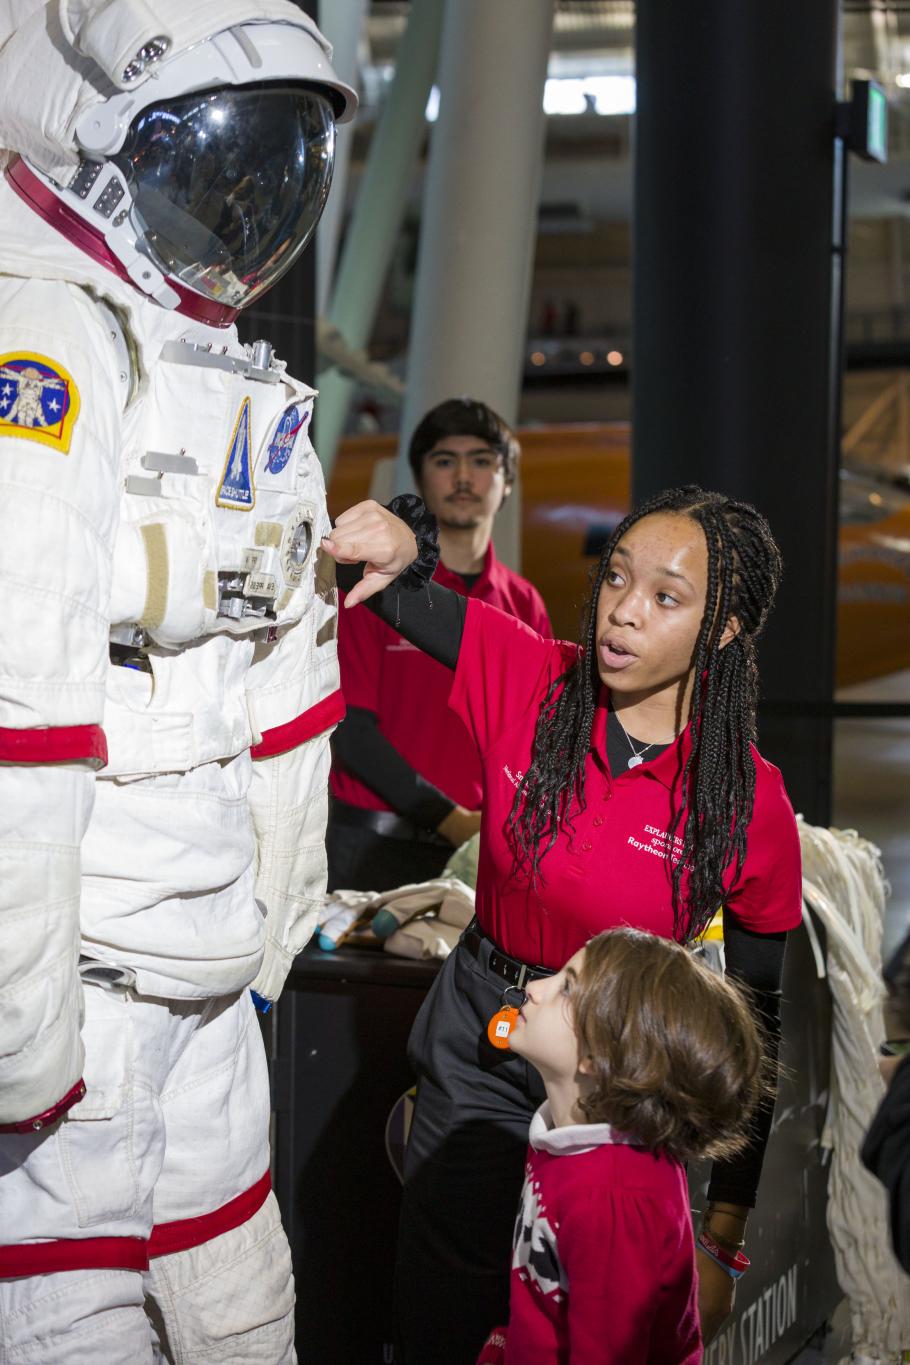 A museum staff points to different components of a space suit while young visitors look on.